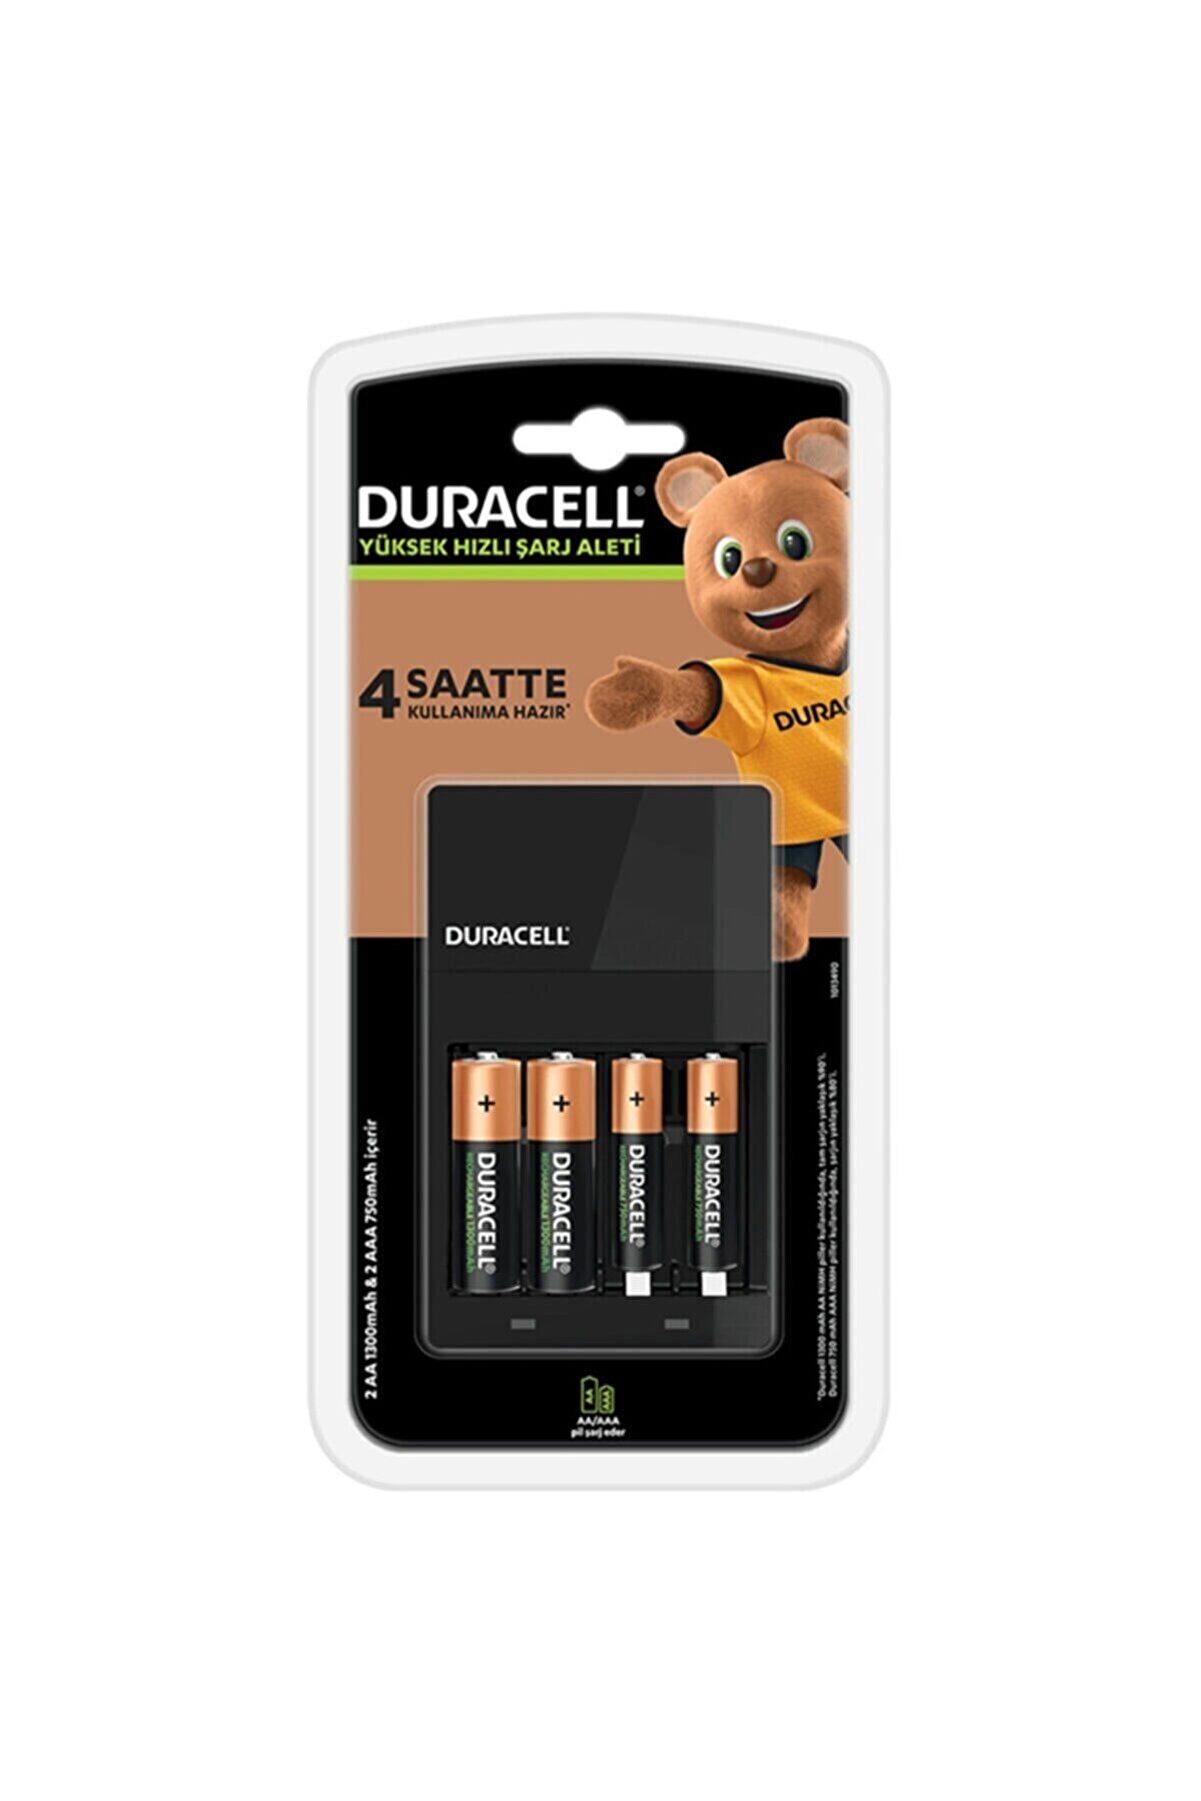 Duracell Cef-14 Pil + 2 Aa + 2 Aaa Pil